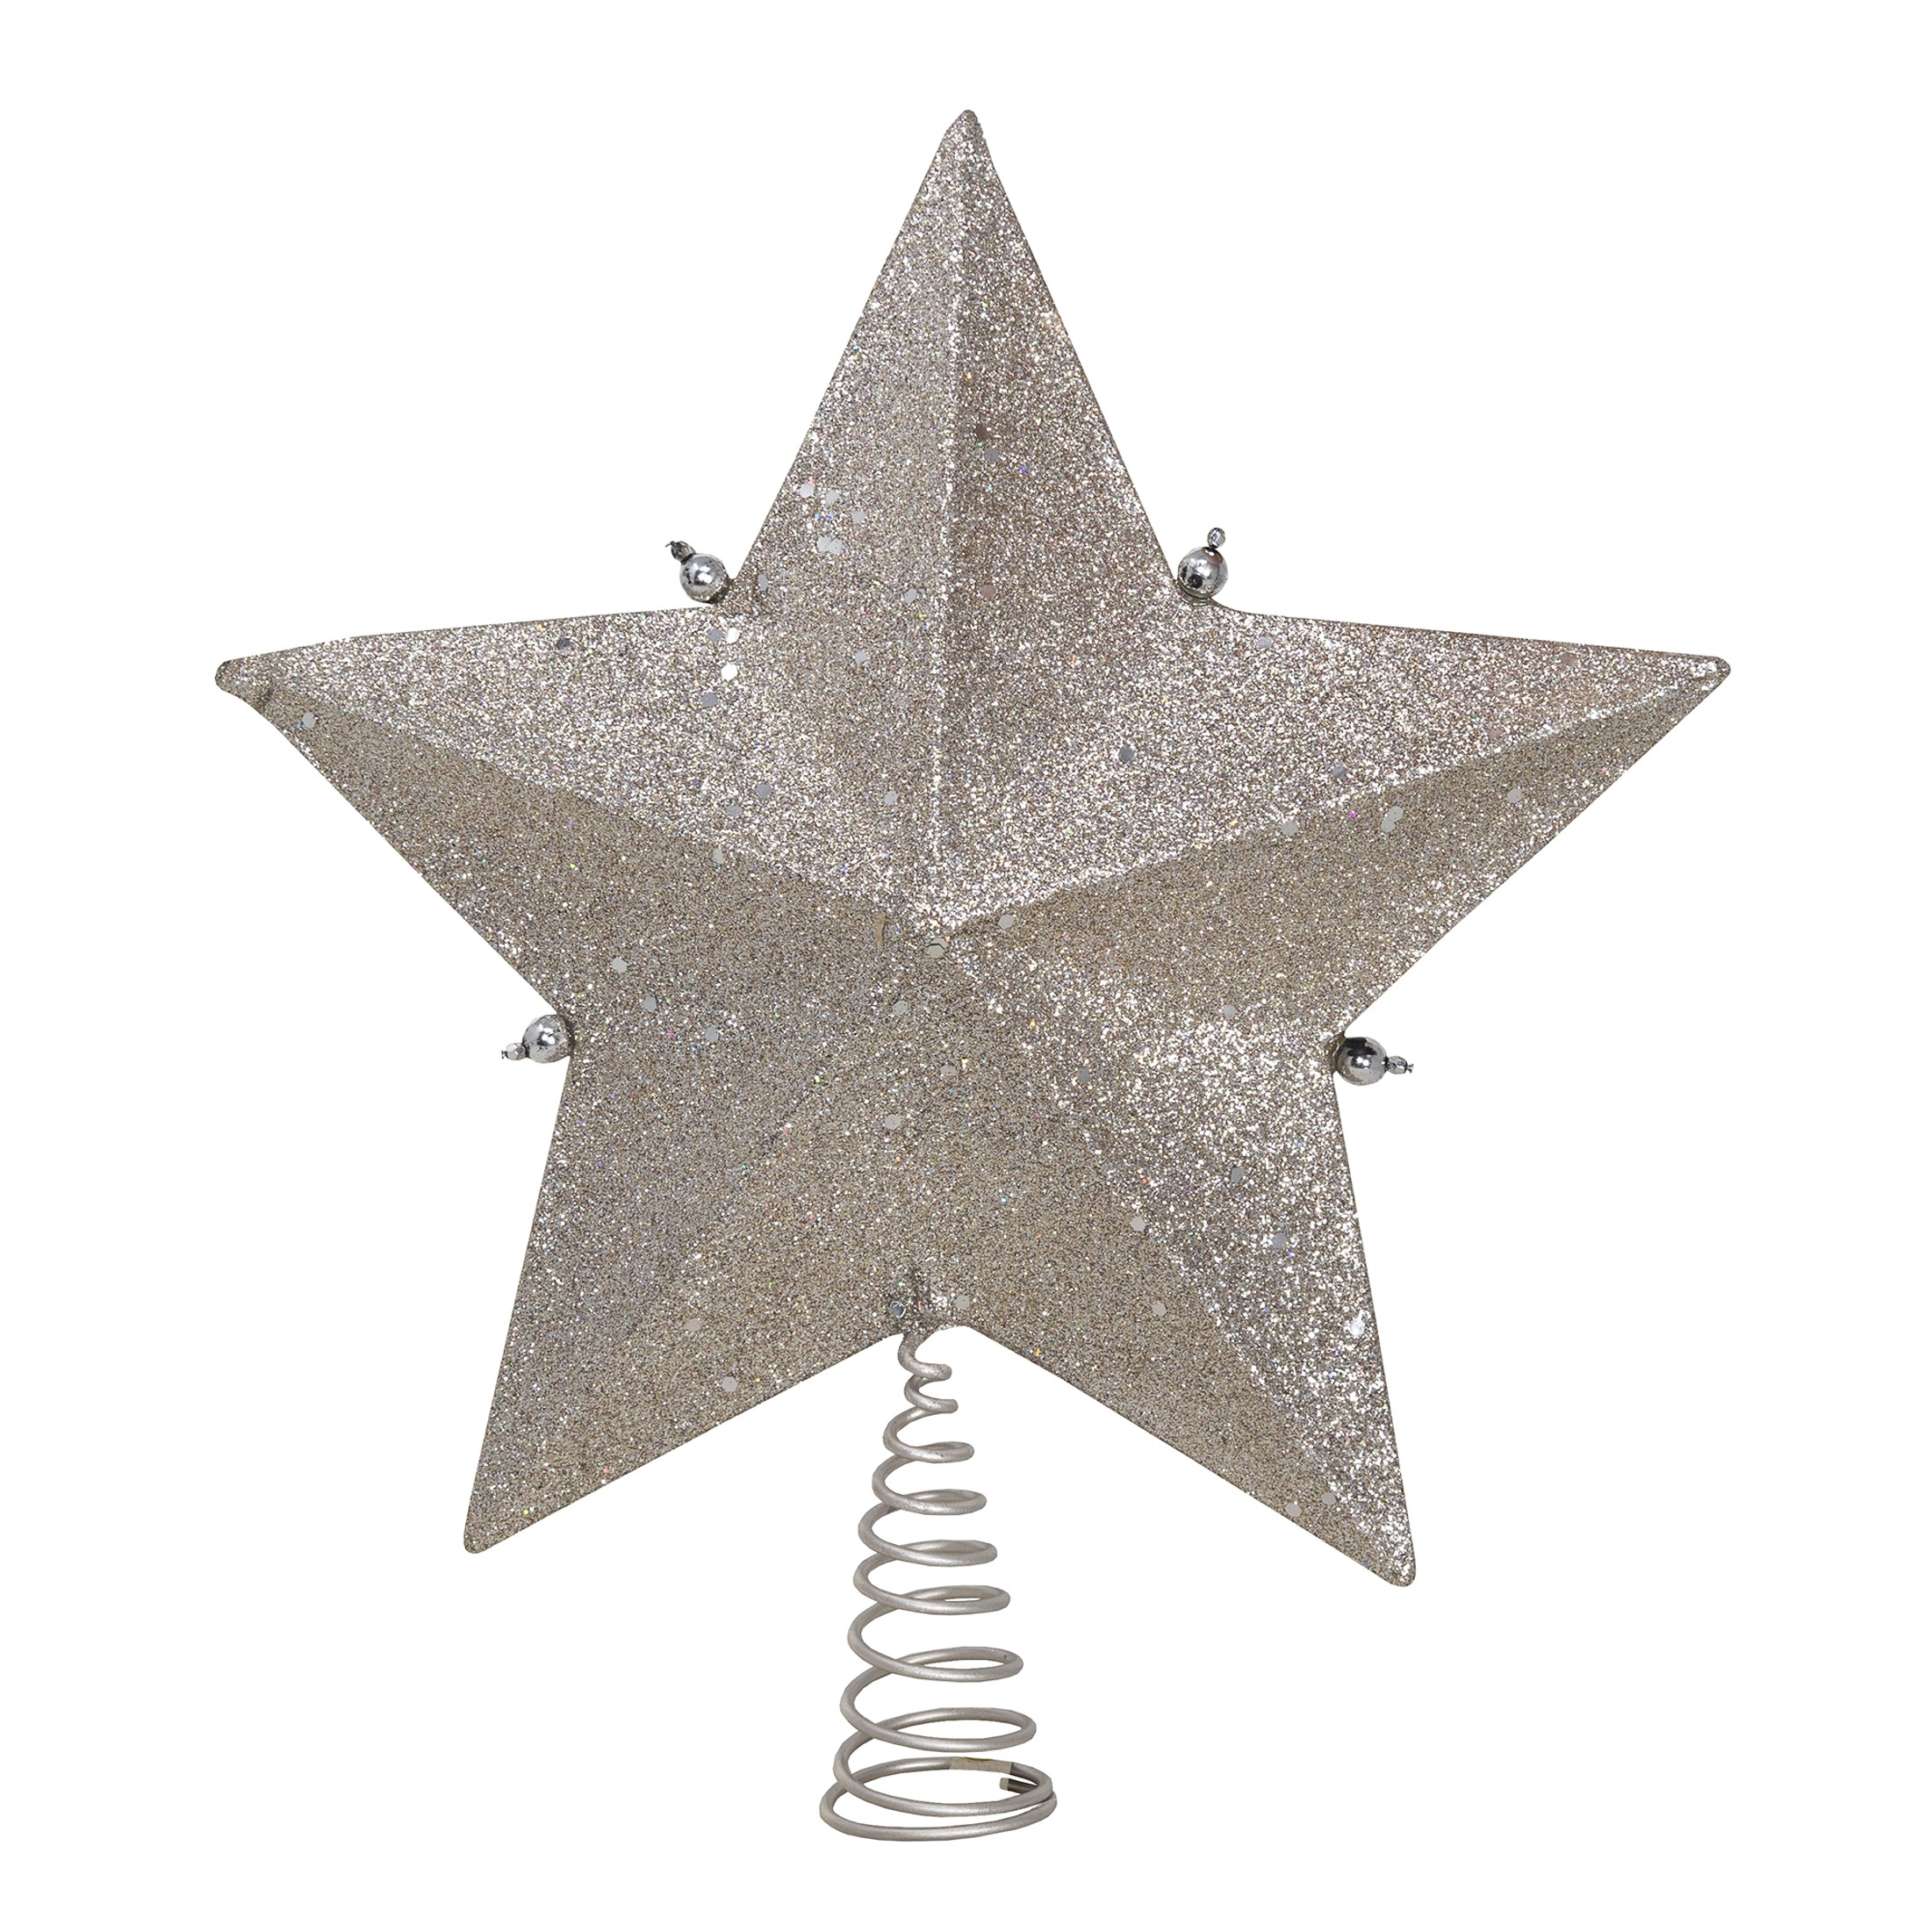 Kurt Adler Star Treetop with Ivory Pearls and Platinum Colored Glitter, 13.5"